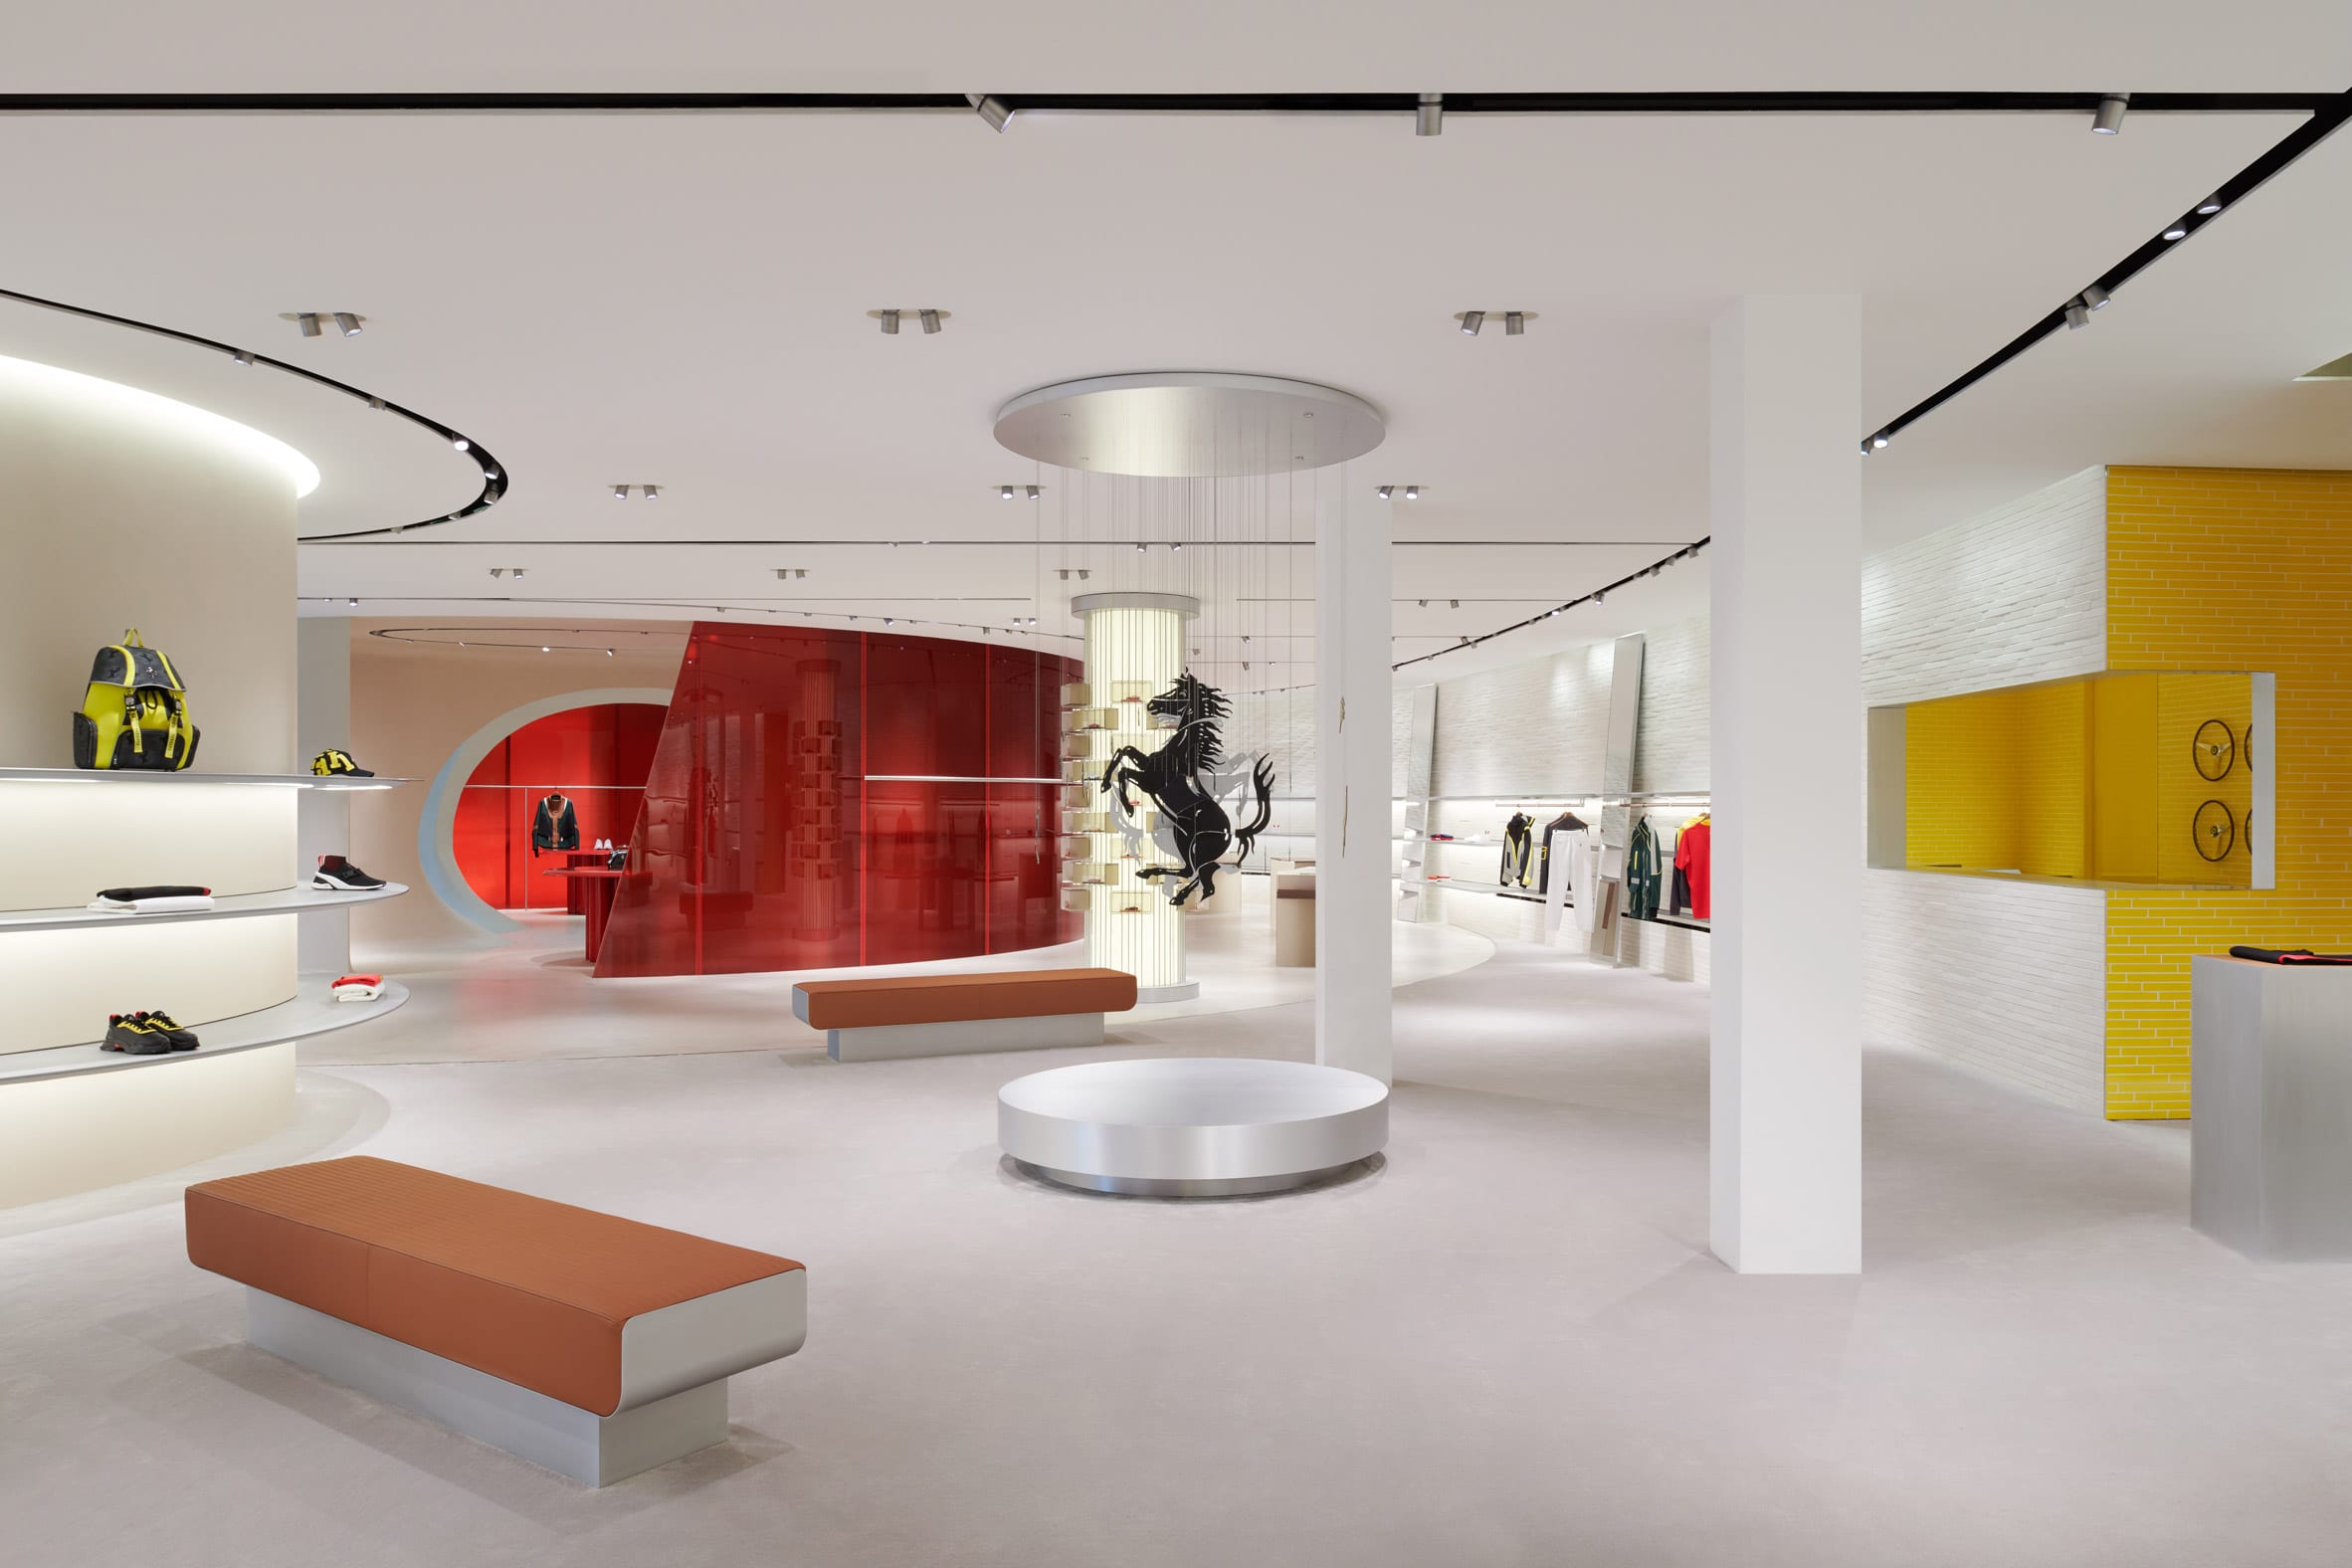 Display area of retail interior Sybarite with red and yellow walls